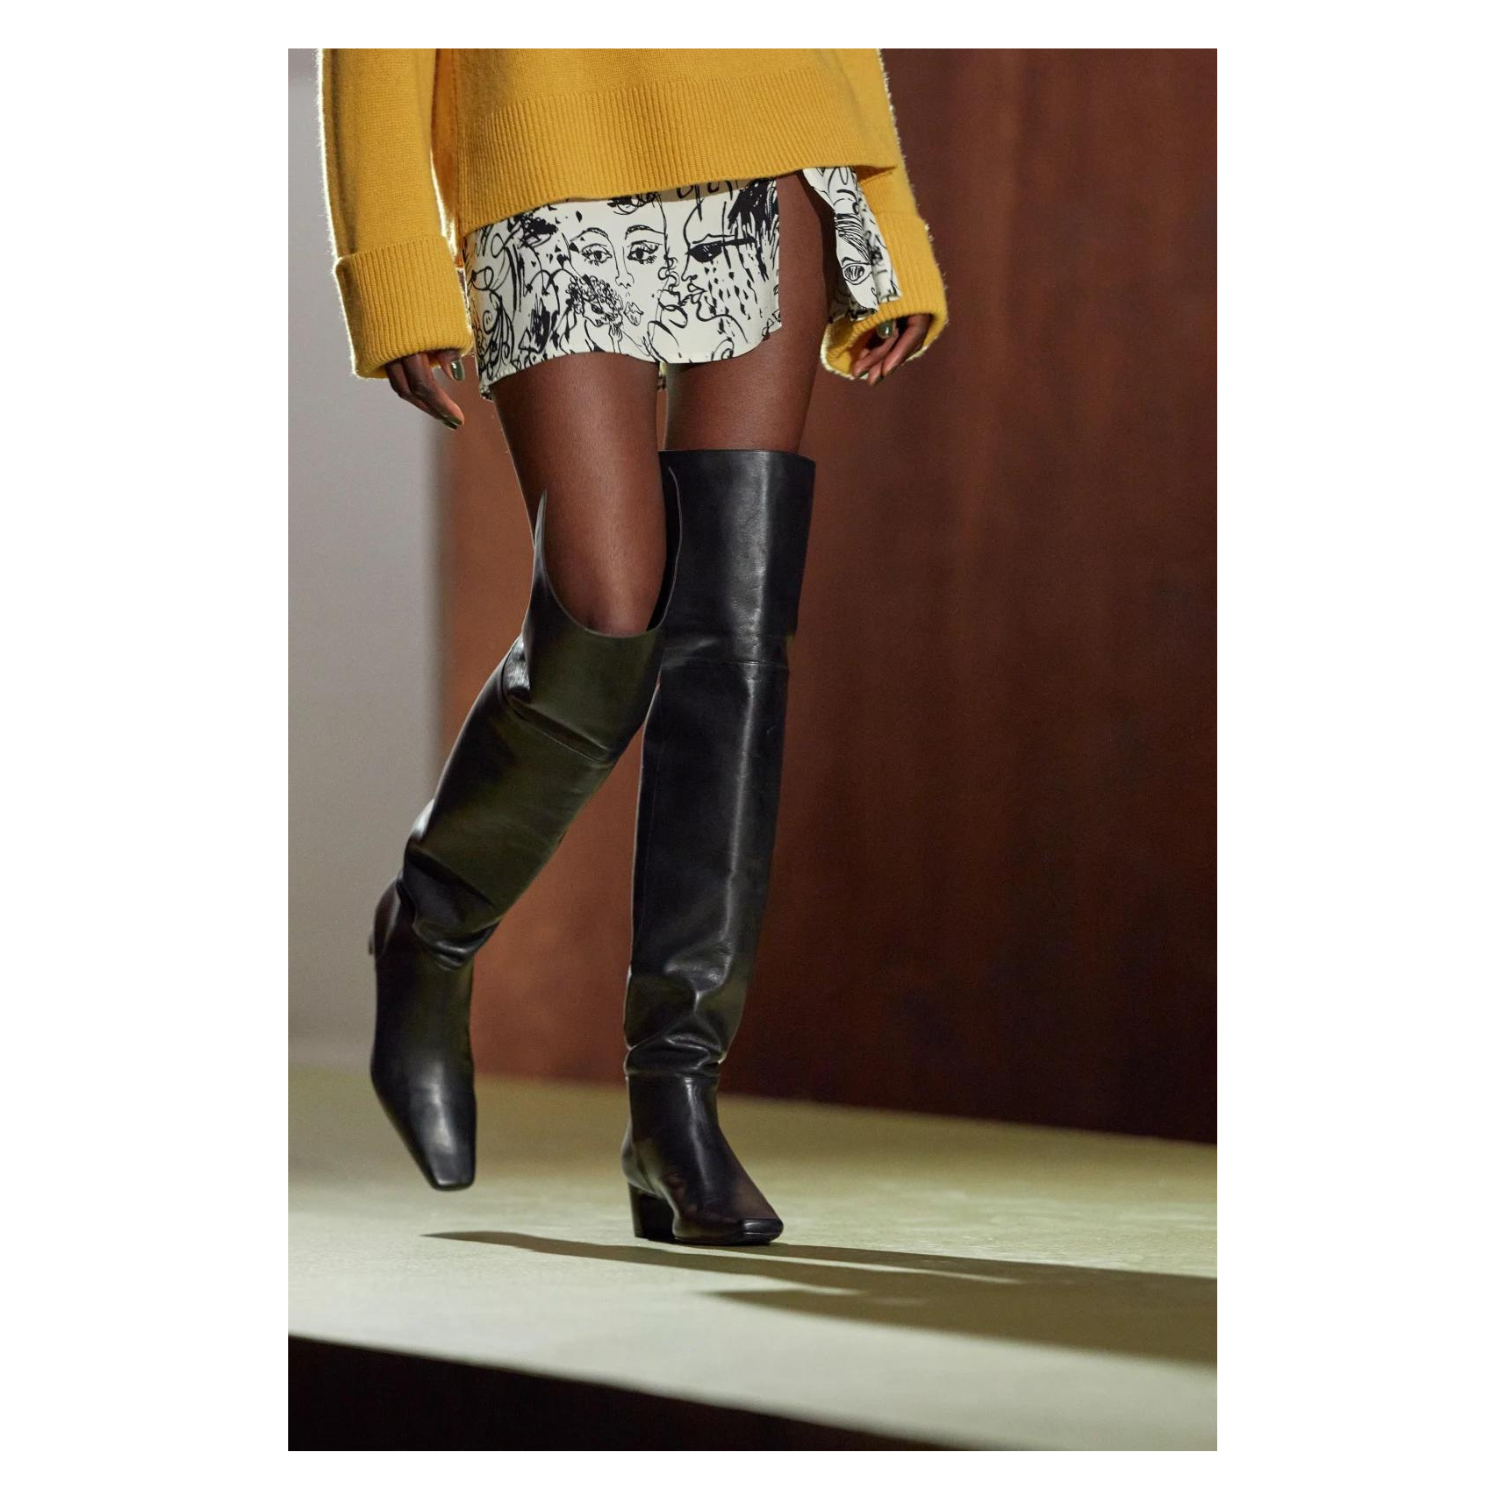 Reformation Ruby Over The Knee Boot, $598